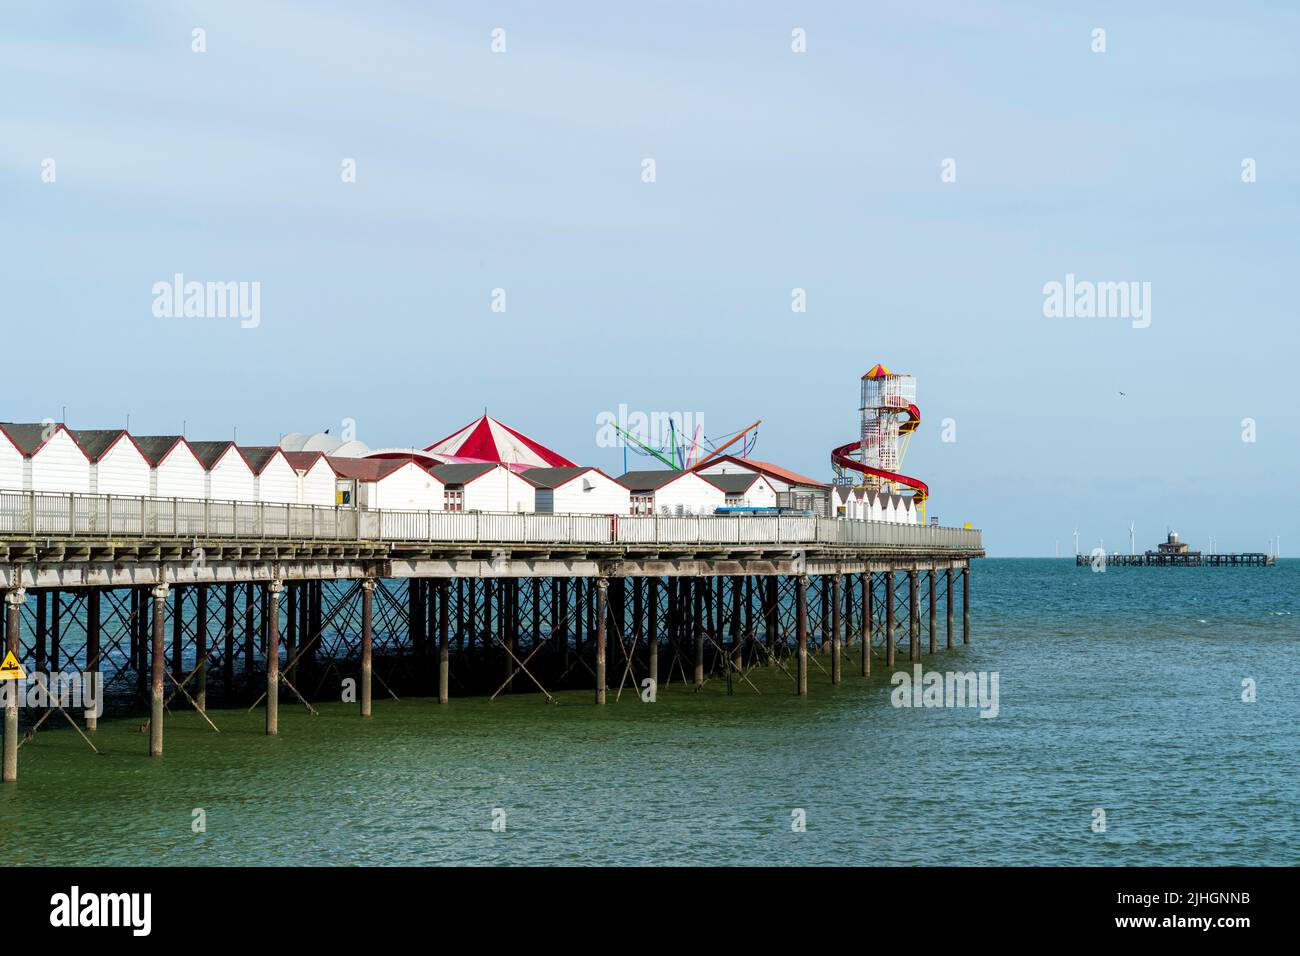 The pier at the Kent resort town of Herne Bay. White wooden chalet retail units along the length with a helter skelter at the end. Summertime. Stock Photo